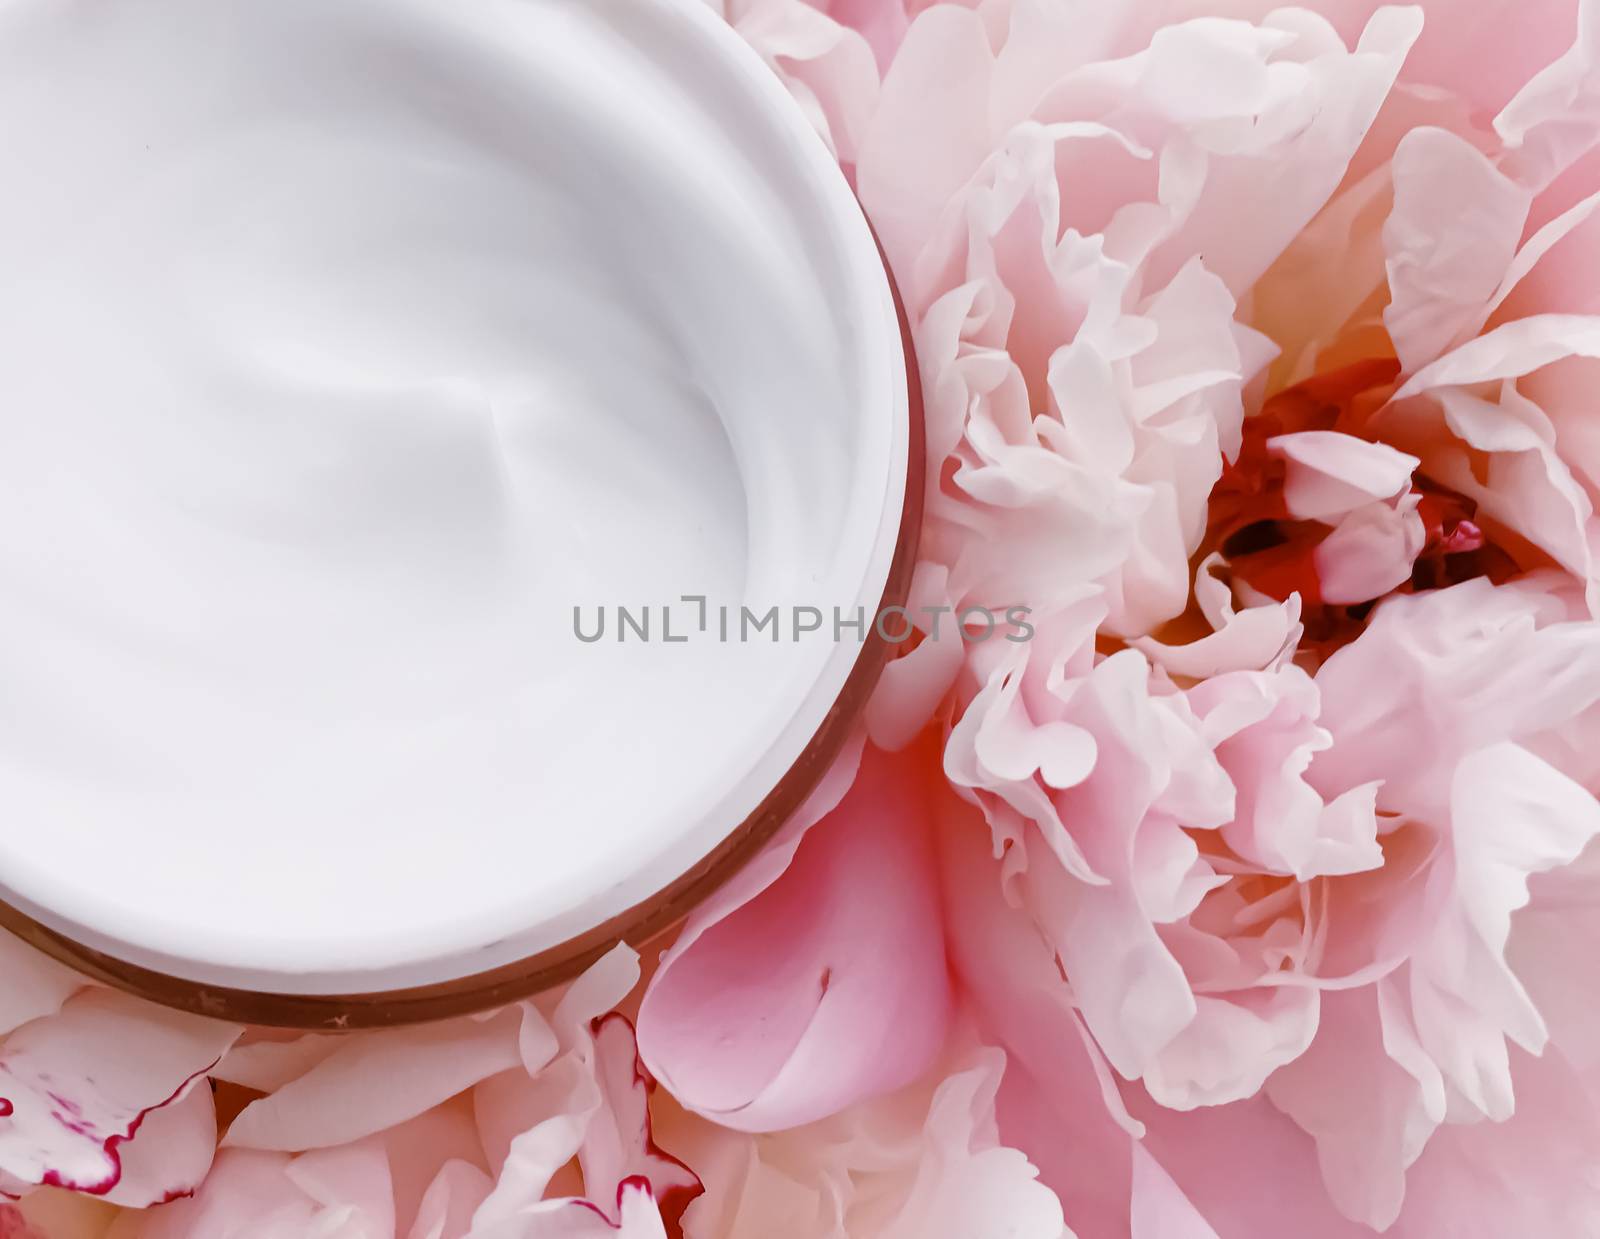 Face cream moisturizer on floral background as luxury skincare cosmetics, healthcare and beauty product concept